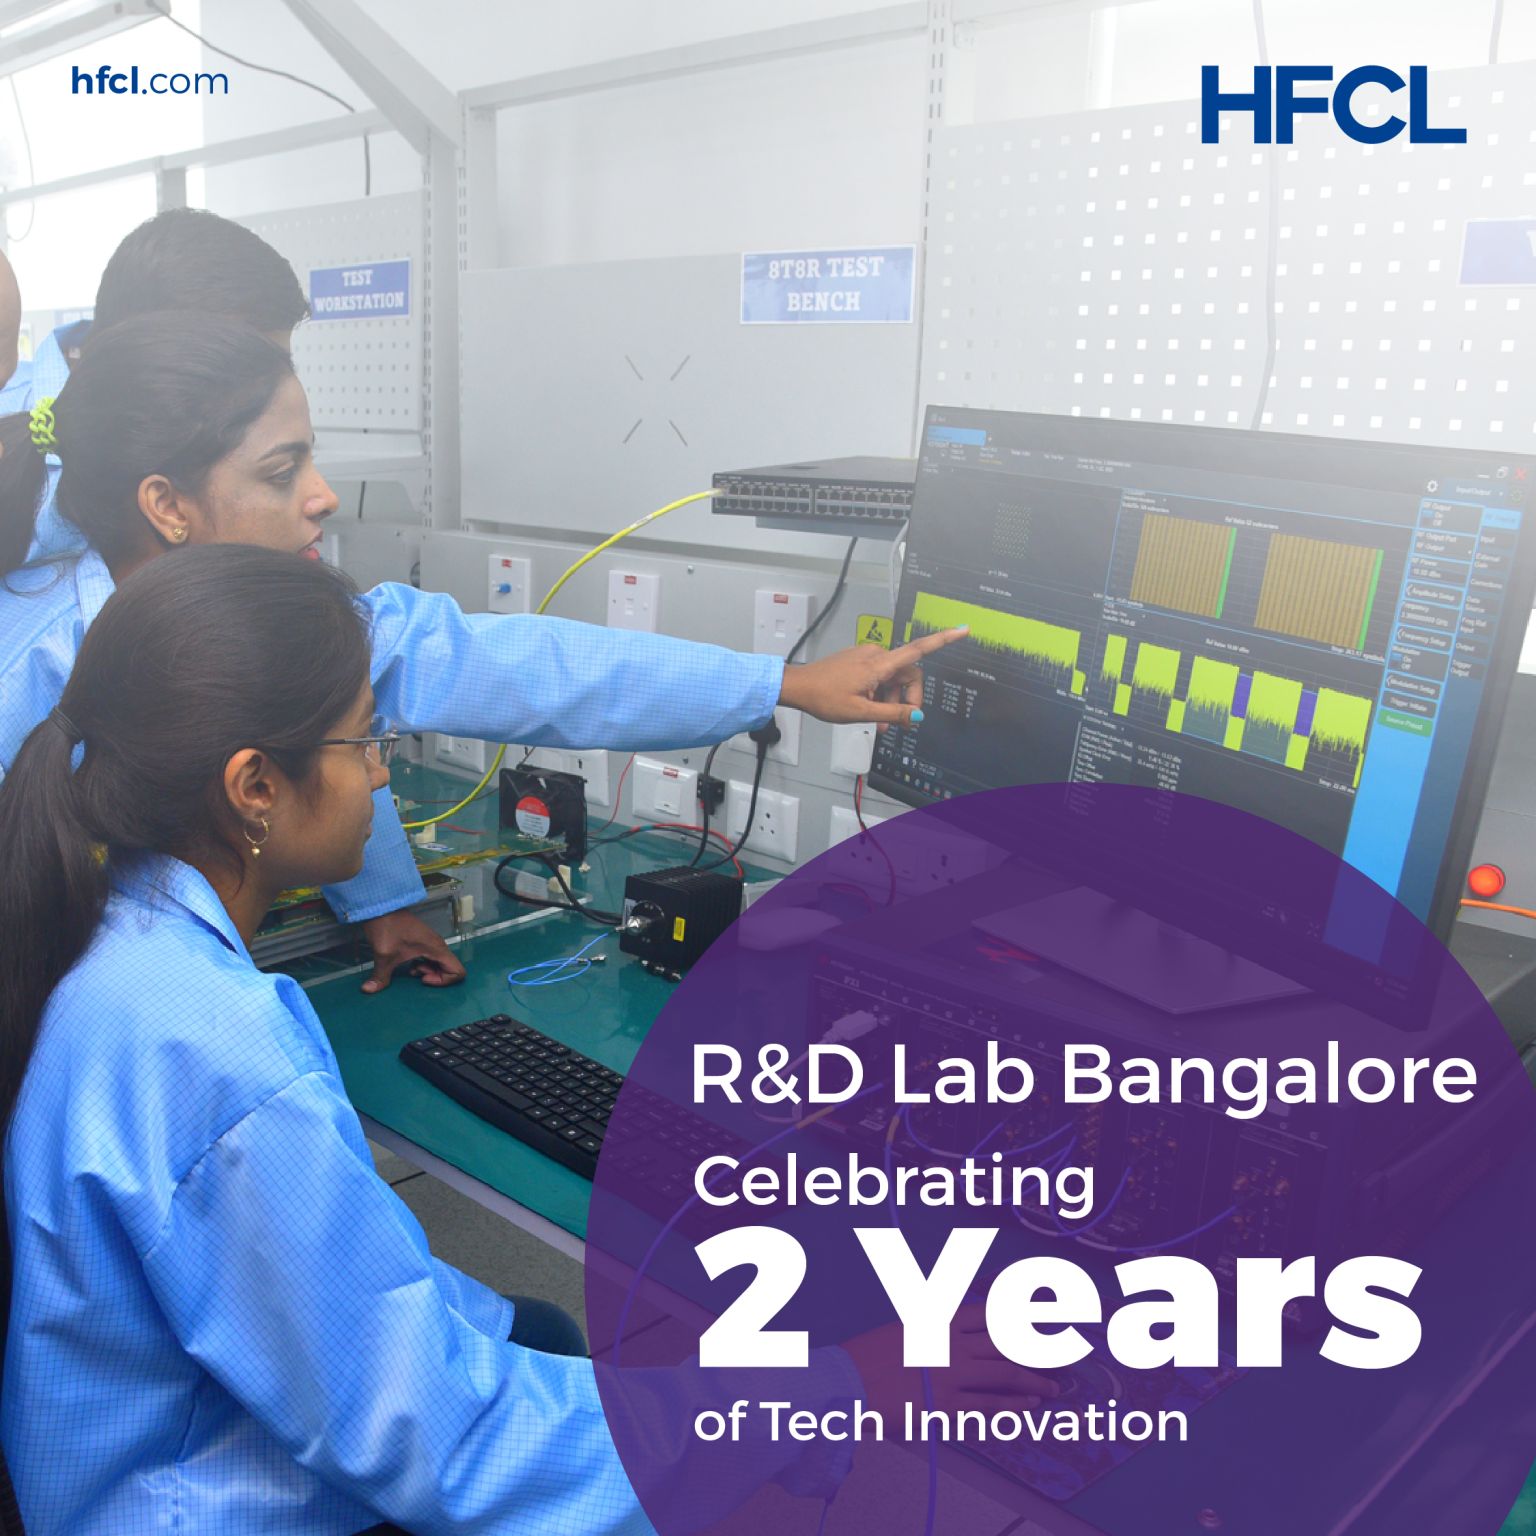 HFCL R&D Lab Completes 2 Years of Disruptive Tech Innovations!